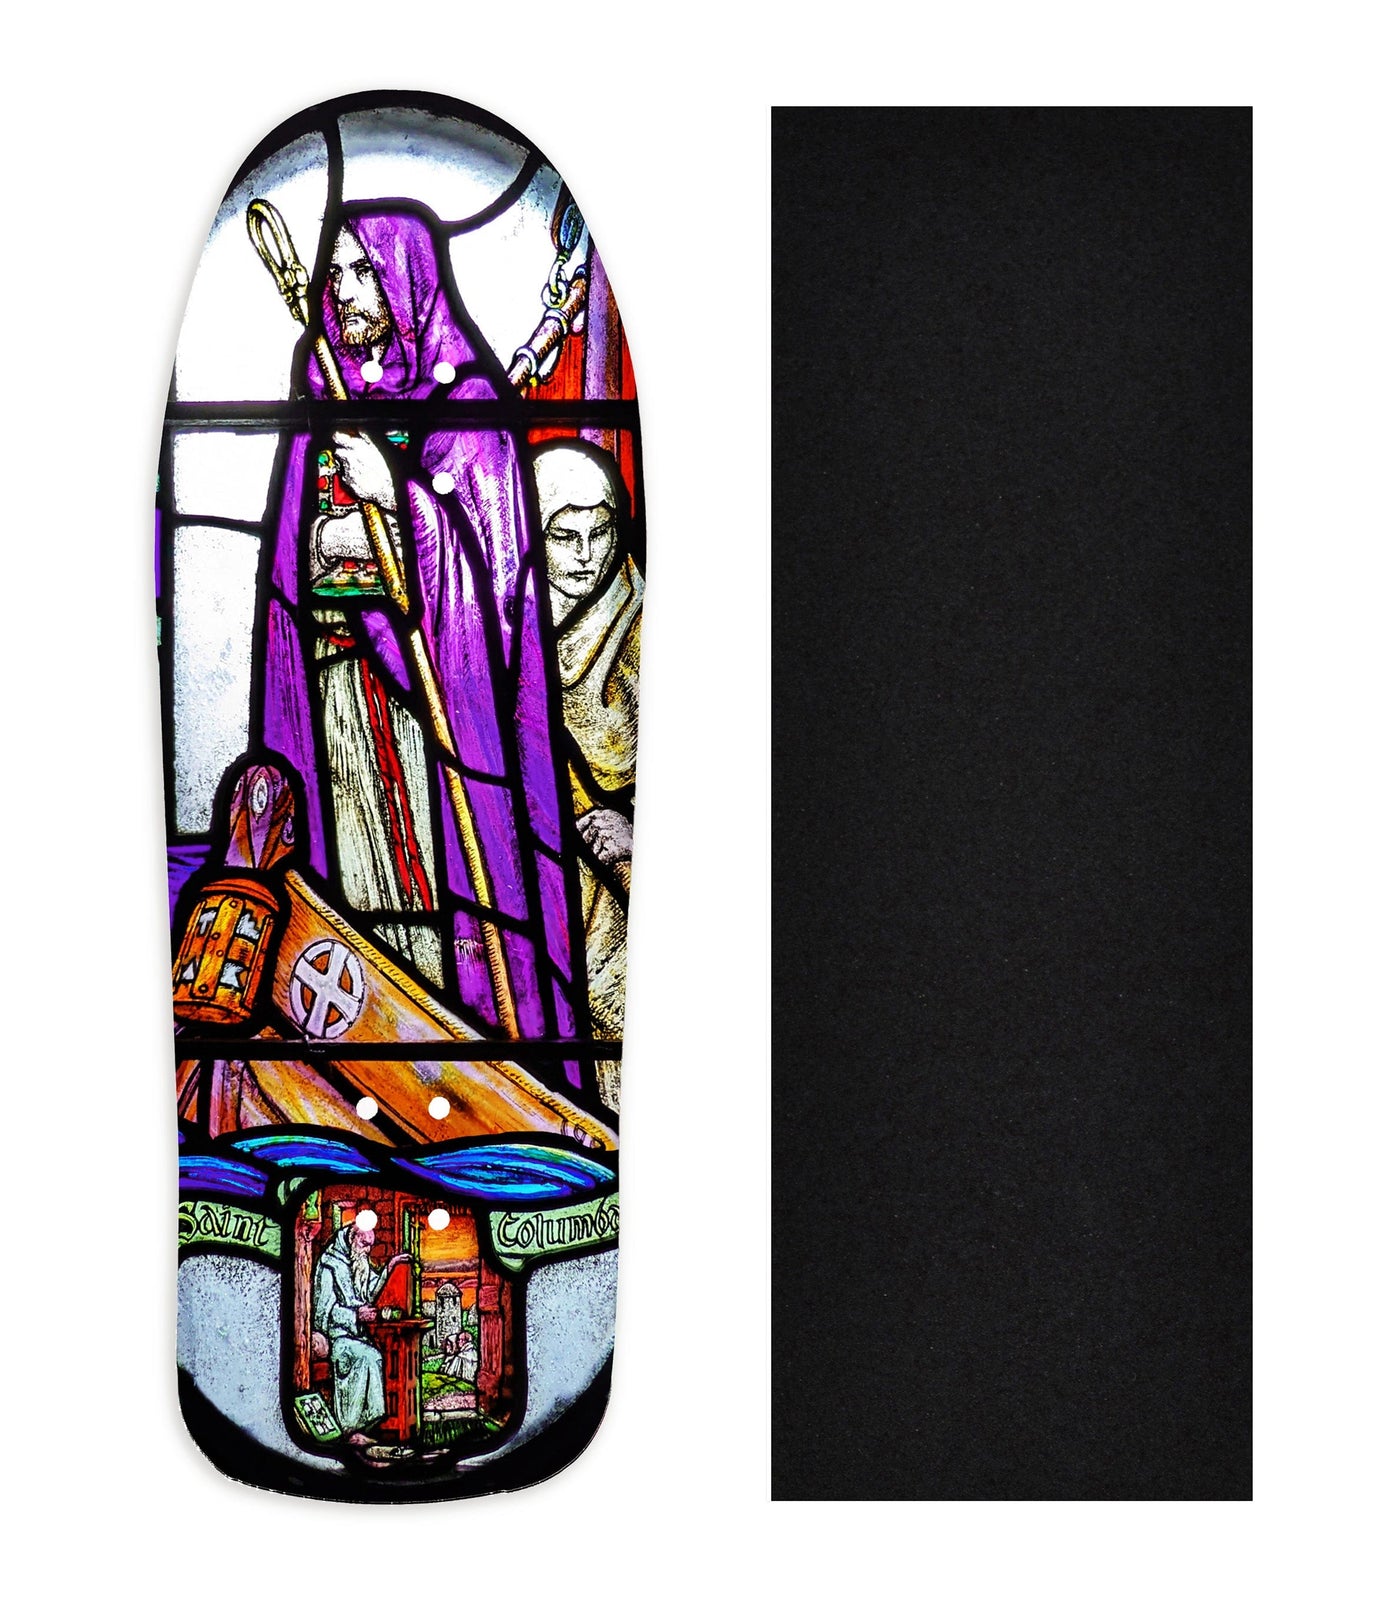 Teak Tuning Heat Transfer Graphic Wooden Fingerboard Deck, "St. Columba Stained Glass" Carlsbad Cruiser Deck